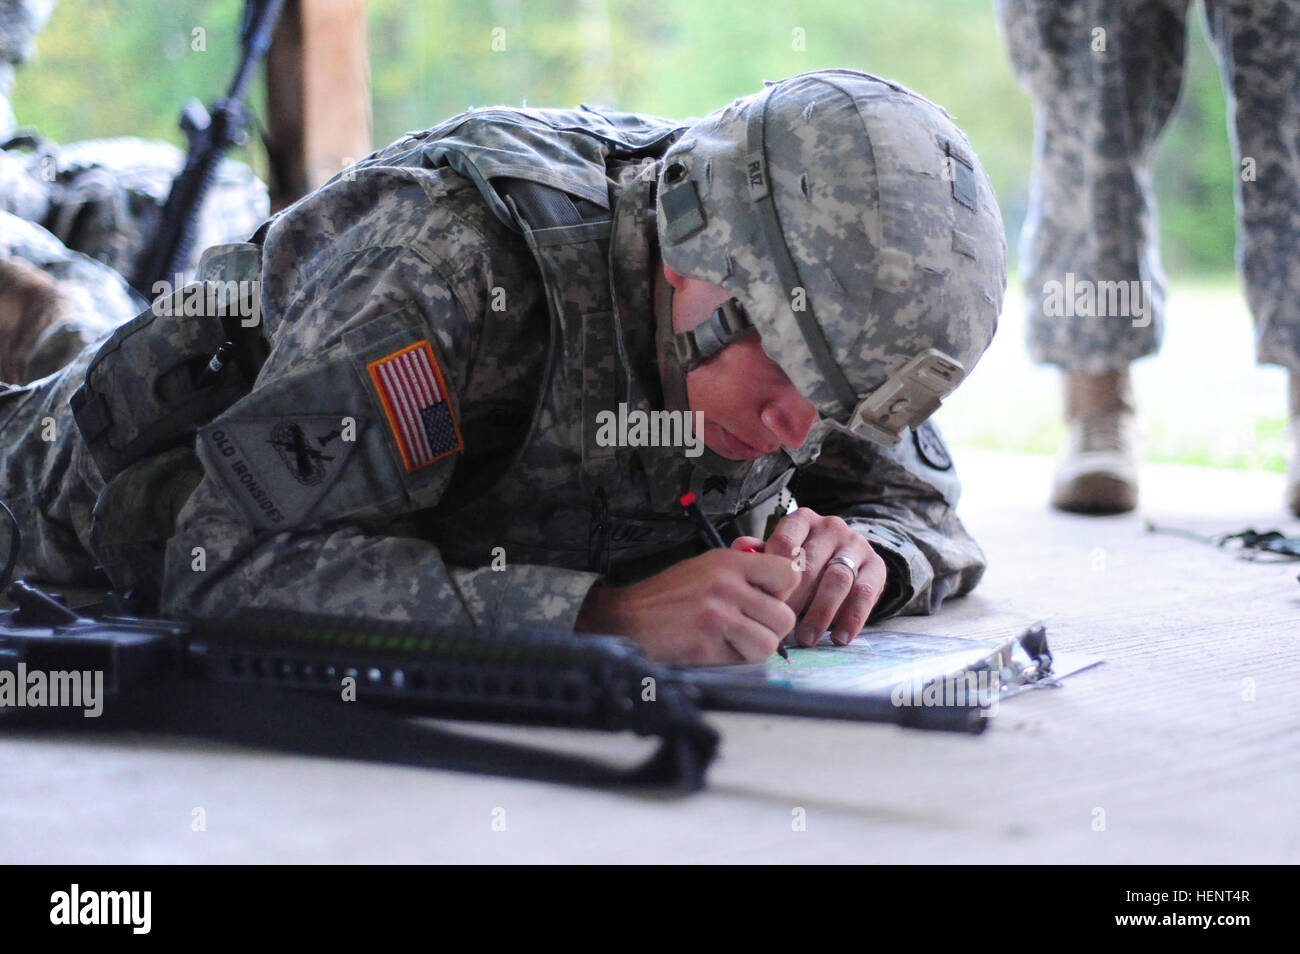 U.S. Army Sgt. Ricardo Ruiz, assigned to C Company, Allied Forces South Battalion, United States Army NATO Brigade,  plots coordinates on a map during the land navigation portion of the  European Best Warrior Competition in Grafenwoehr, Germany, Sept. 14, 2014. The competition is a weeklong event that pushes Soldiers to the limits of their physical stamina, bearing, knowledge, adaptability and technical and tactical skills. The best warriors are ready and resilient Soldiers who live the Army values and lead from the front. (U.S. Army photo by Staff Sgt. Pablo N. Piedra/Released) European Best  Stock Photo